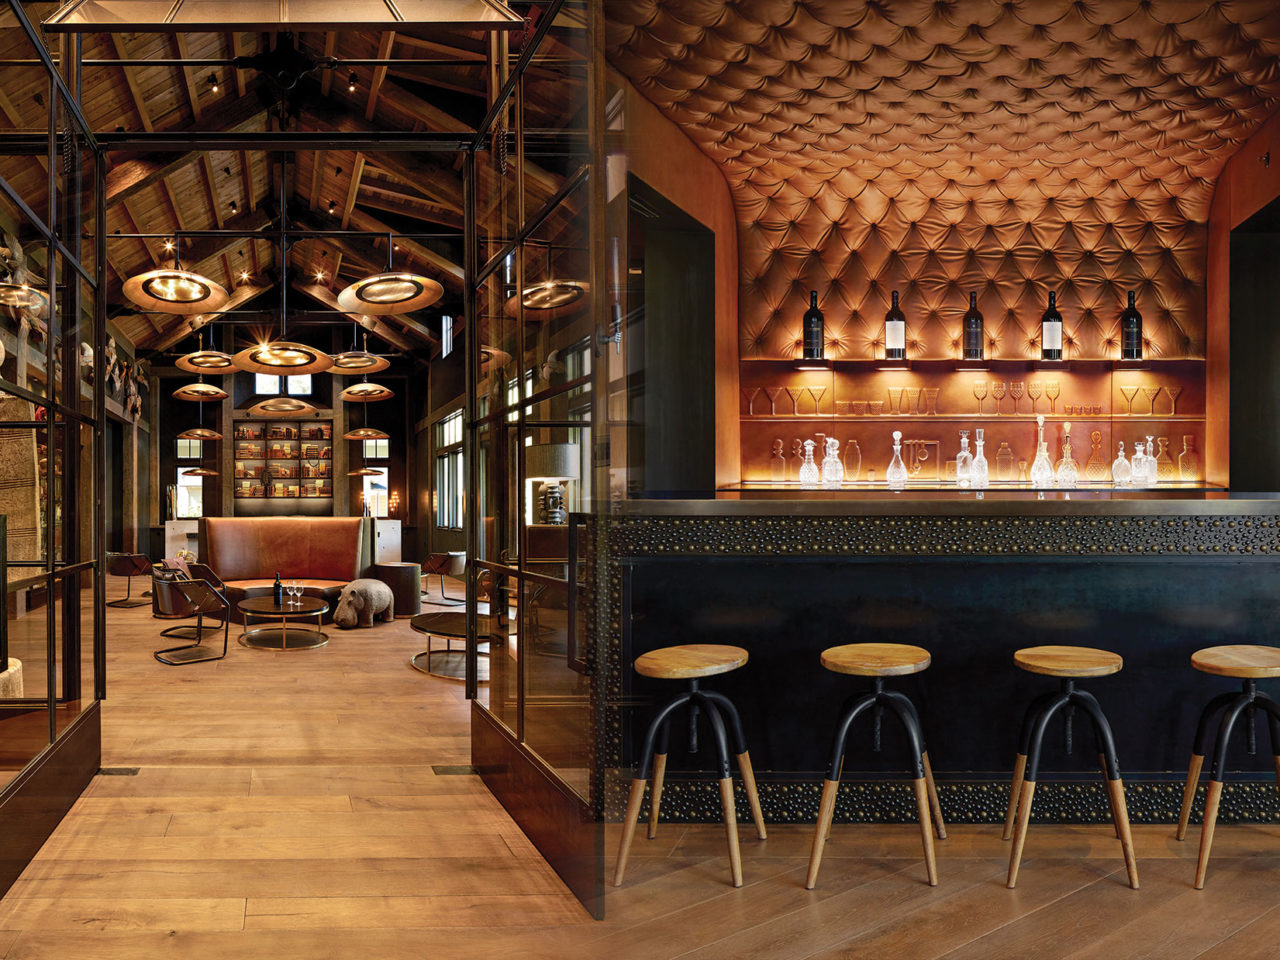 Tasting room renovation and remodel completed by FDC in Sonoma County